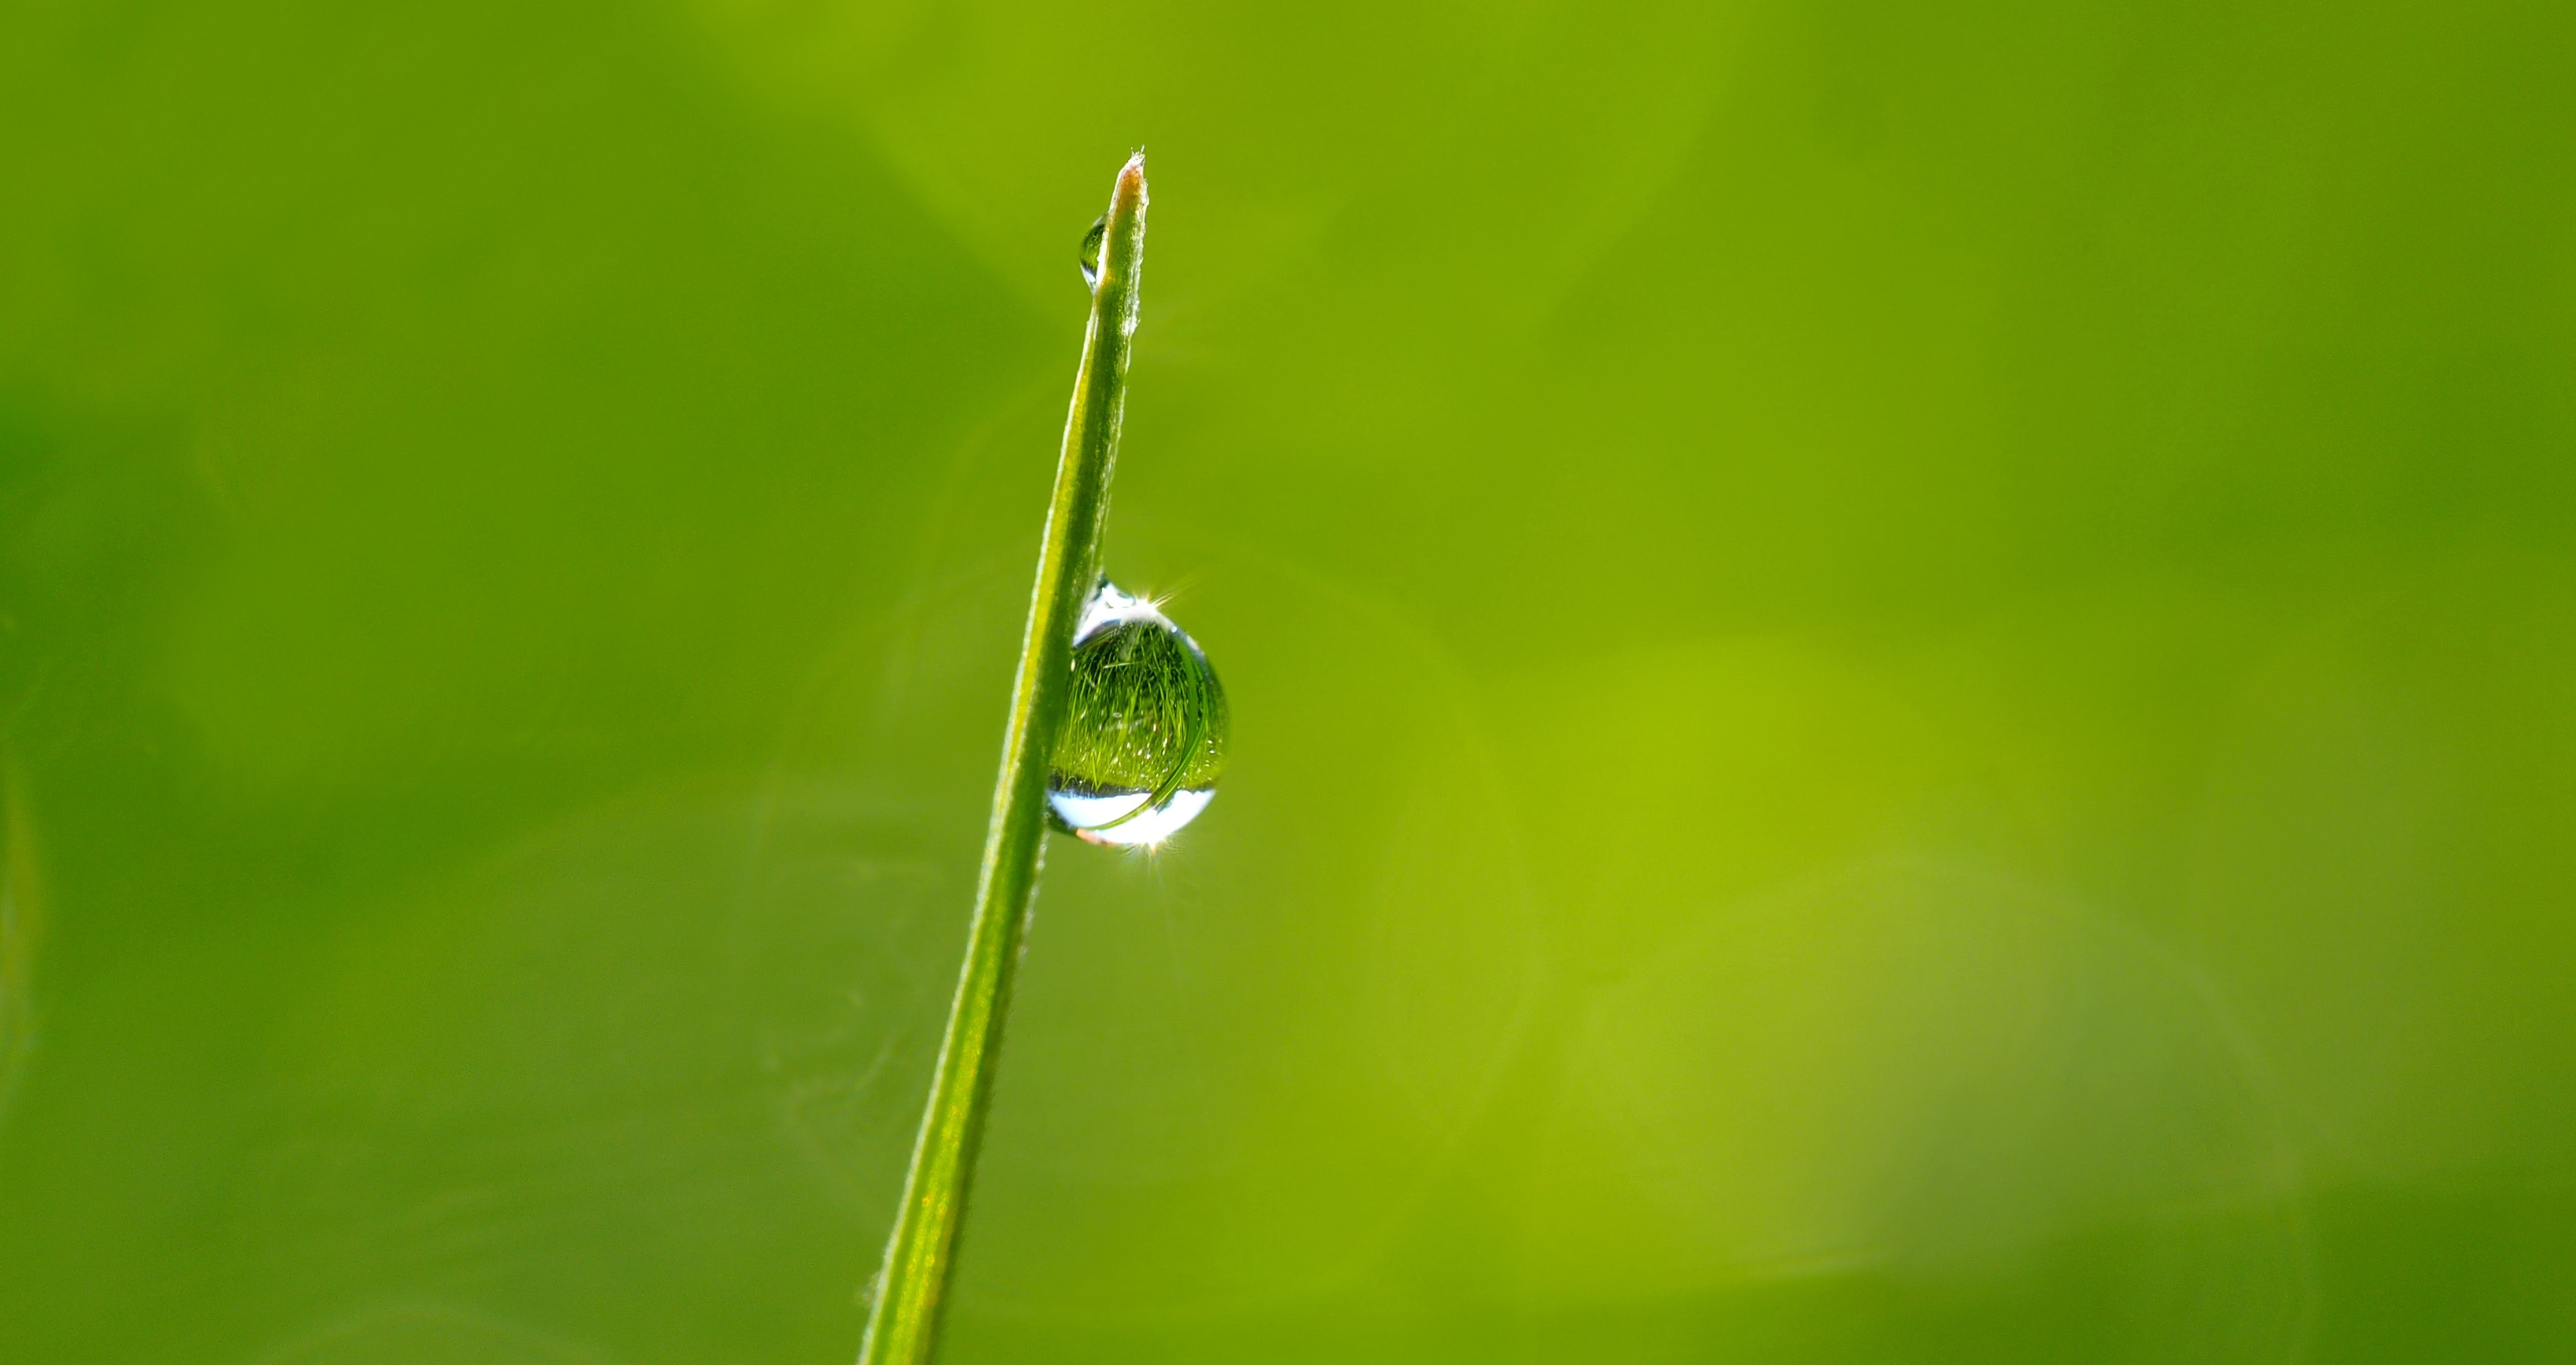 Macro Photography of Droplet on Green Leaf during Daytime, Blade of grass, Light glare, Water, Reflection, HQ Photo